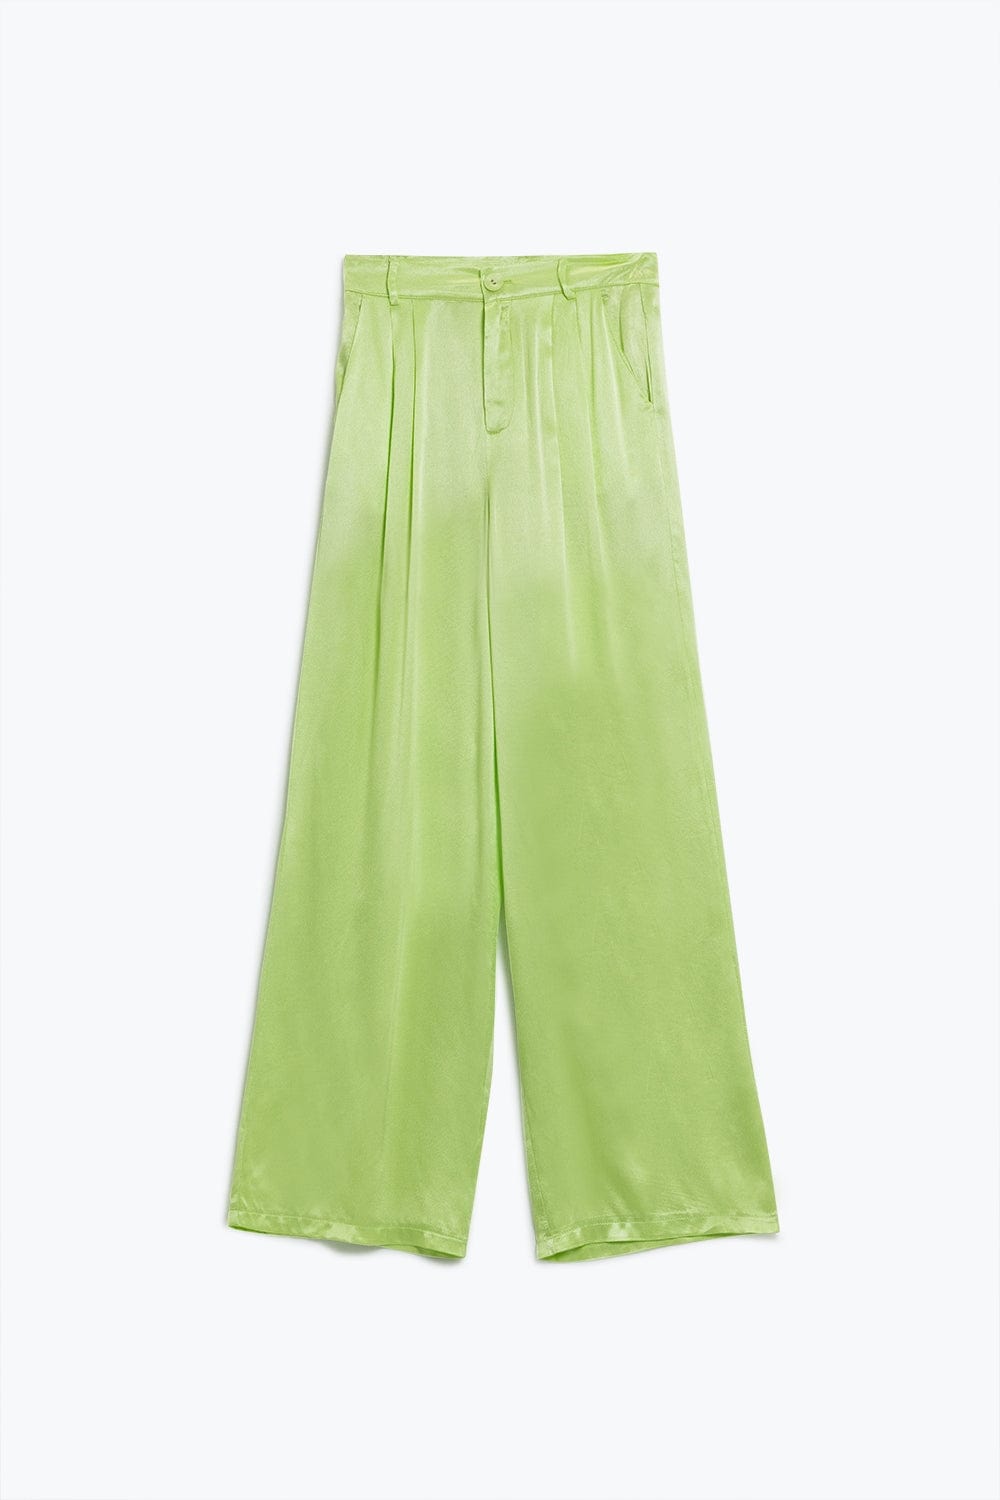 Q2 Women's Pants & Trousers Lime Flared Satin Pants With Pockets